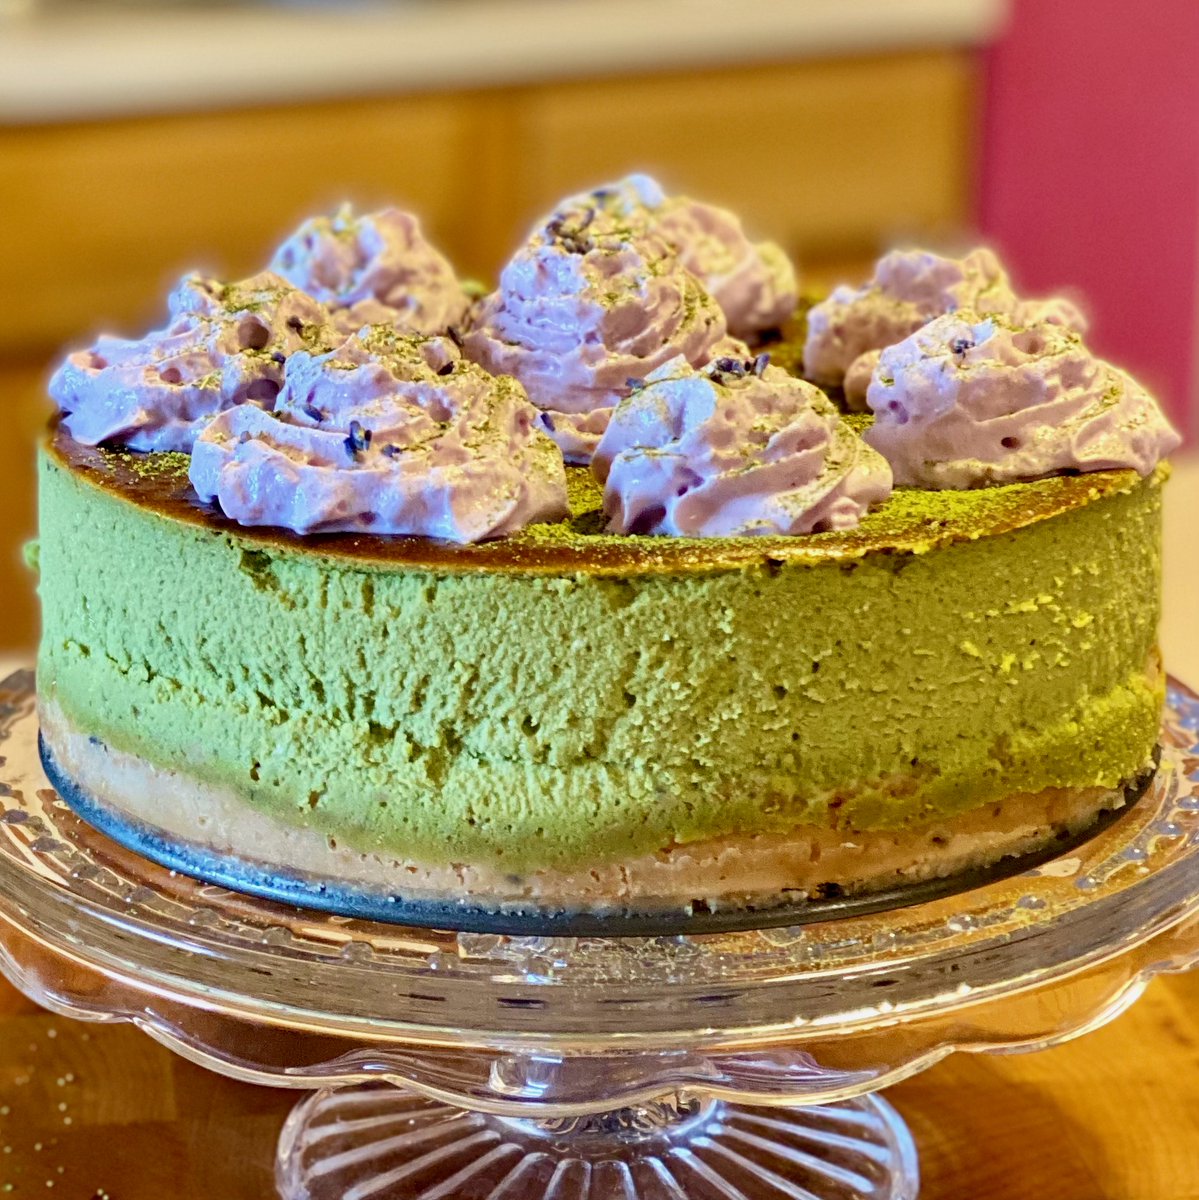 Matcha cheesecake with a lavender shortbread crust and lavender-lemonade whipped cream.